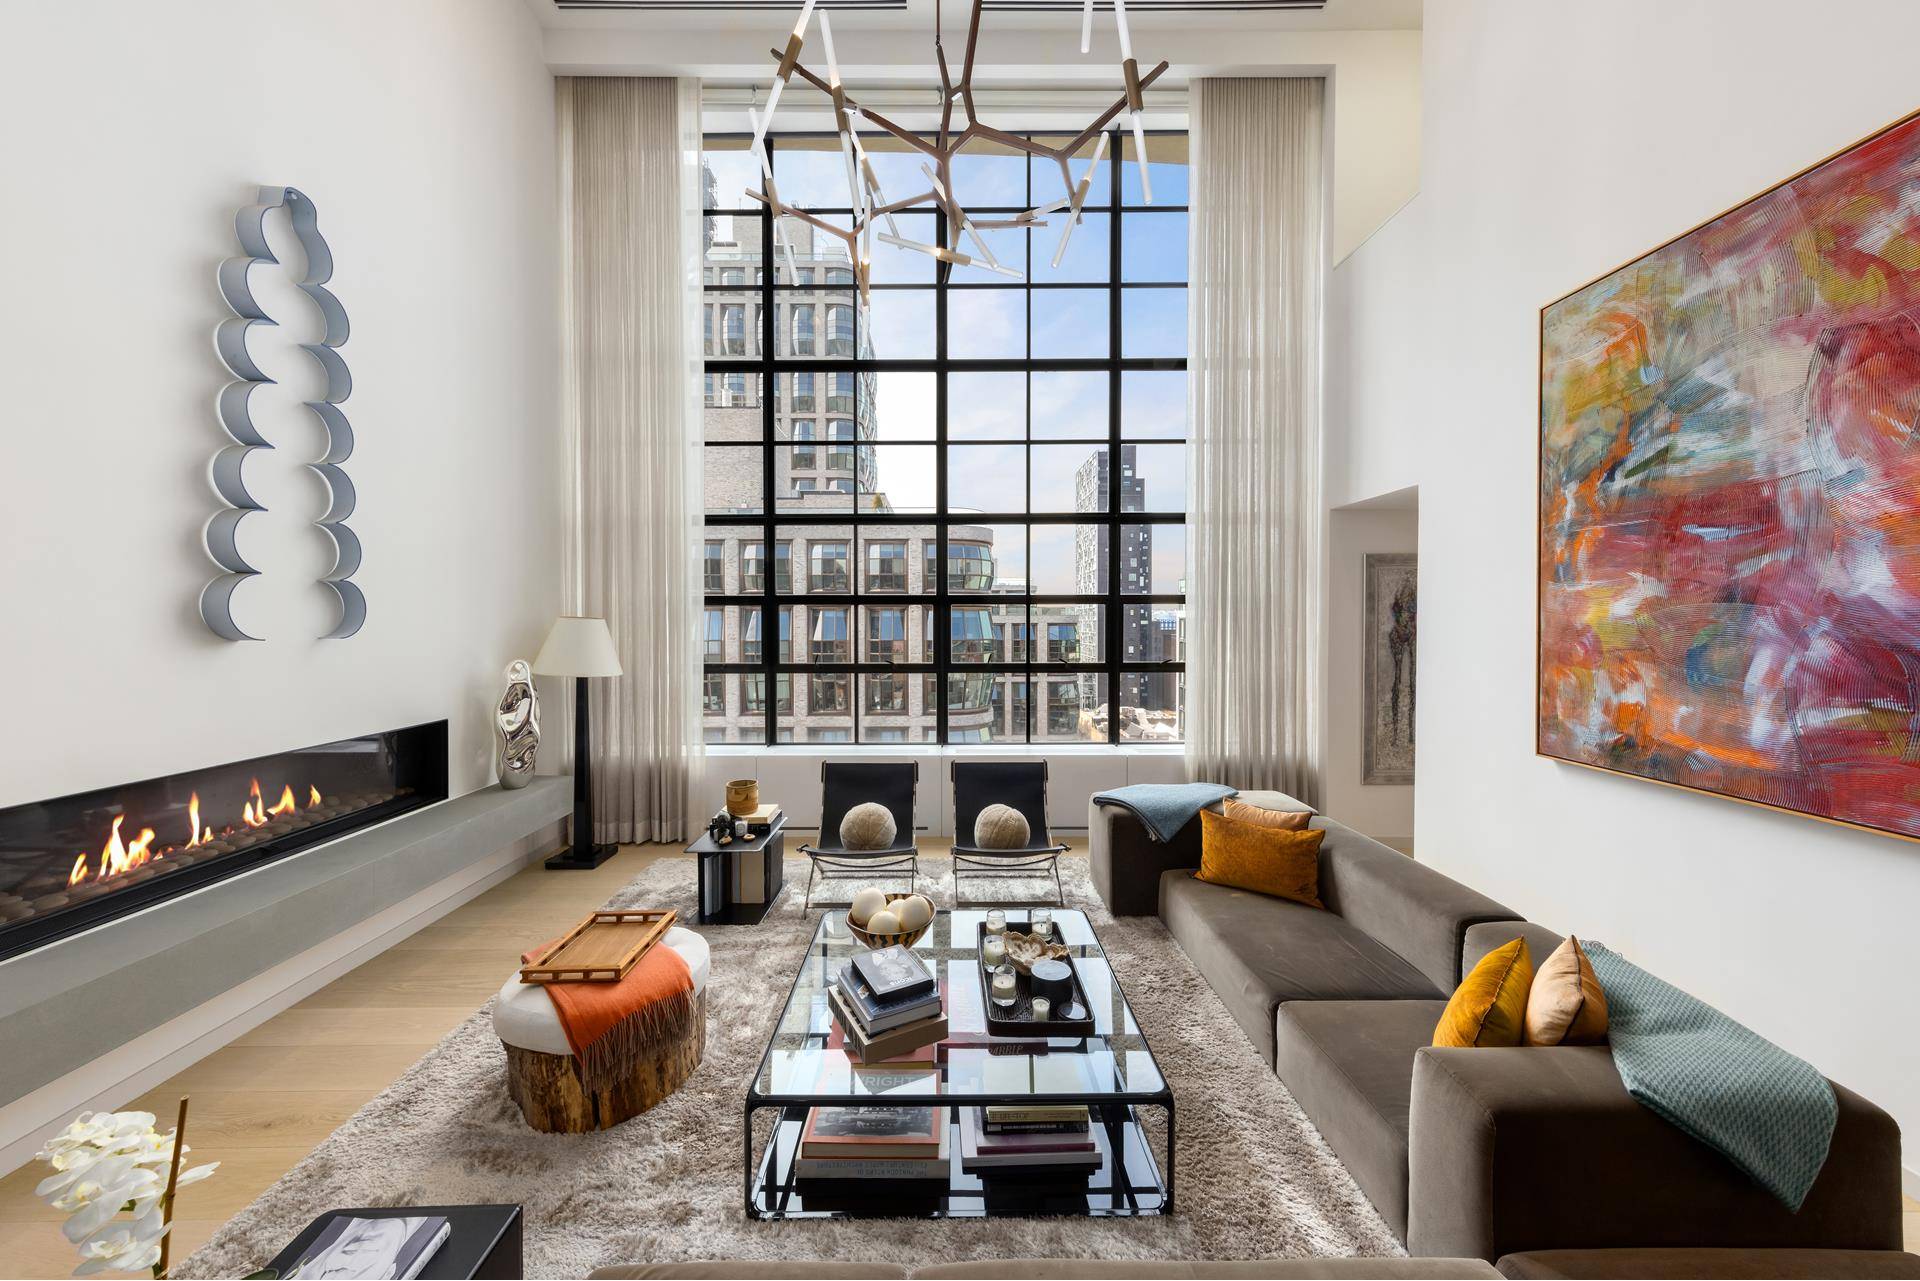 AVAILABLE IMMEDIATELY PENTHOUSE WITH A PRIVATE HEATED POOL Incredible triplex PH topped by a stunning outdoor terrace with a private pool featuring skyline views including the Empire State Building.